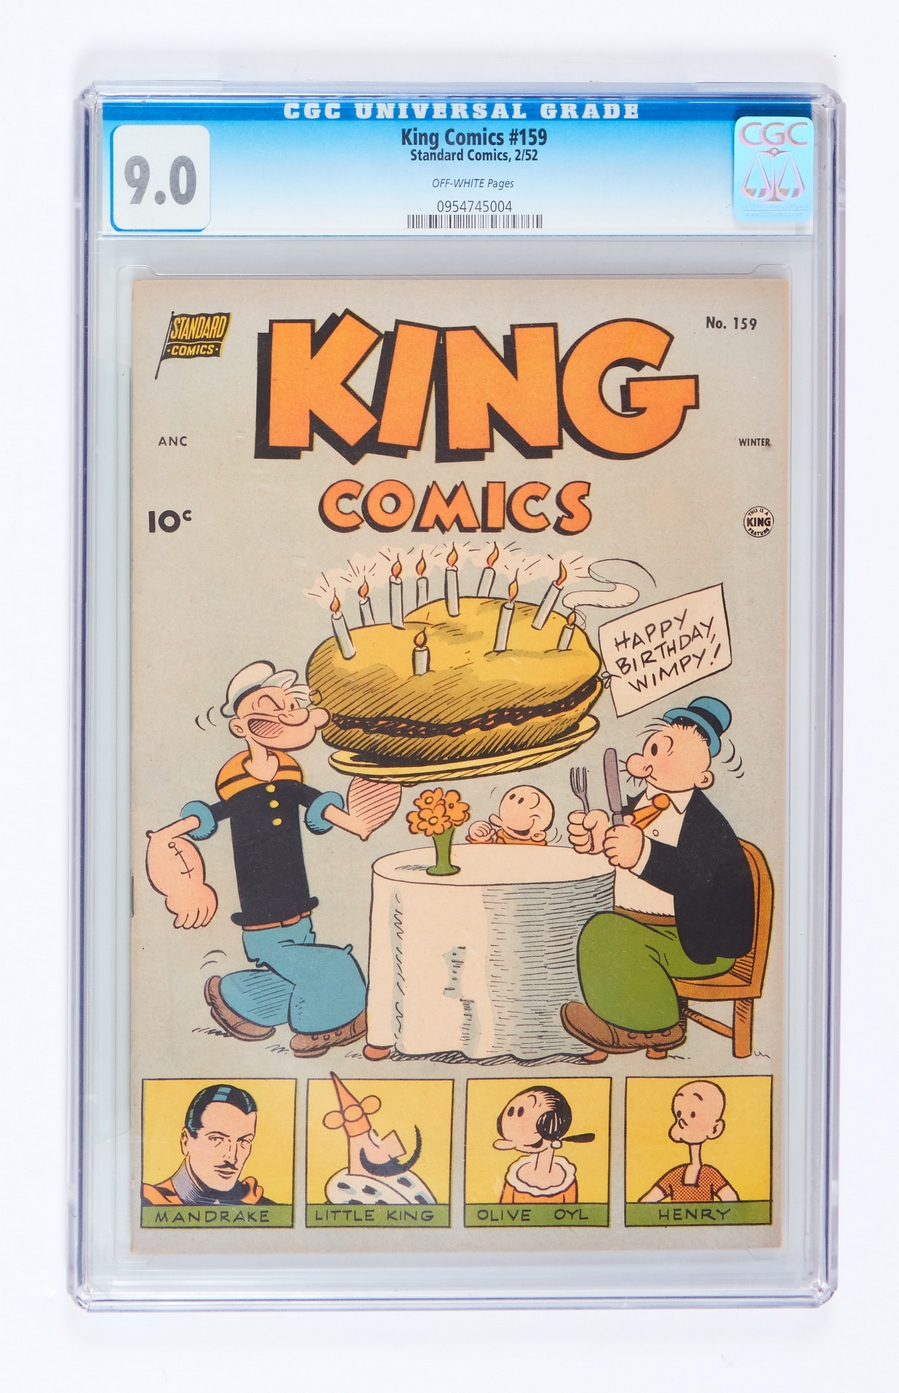 King Comics 159 (1952). CGC 9.0. Off-white pages. No Reserve